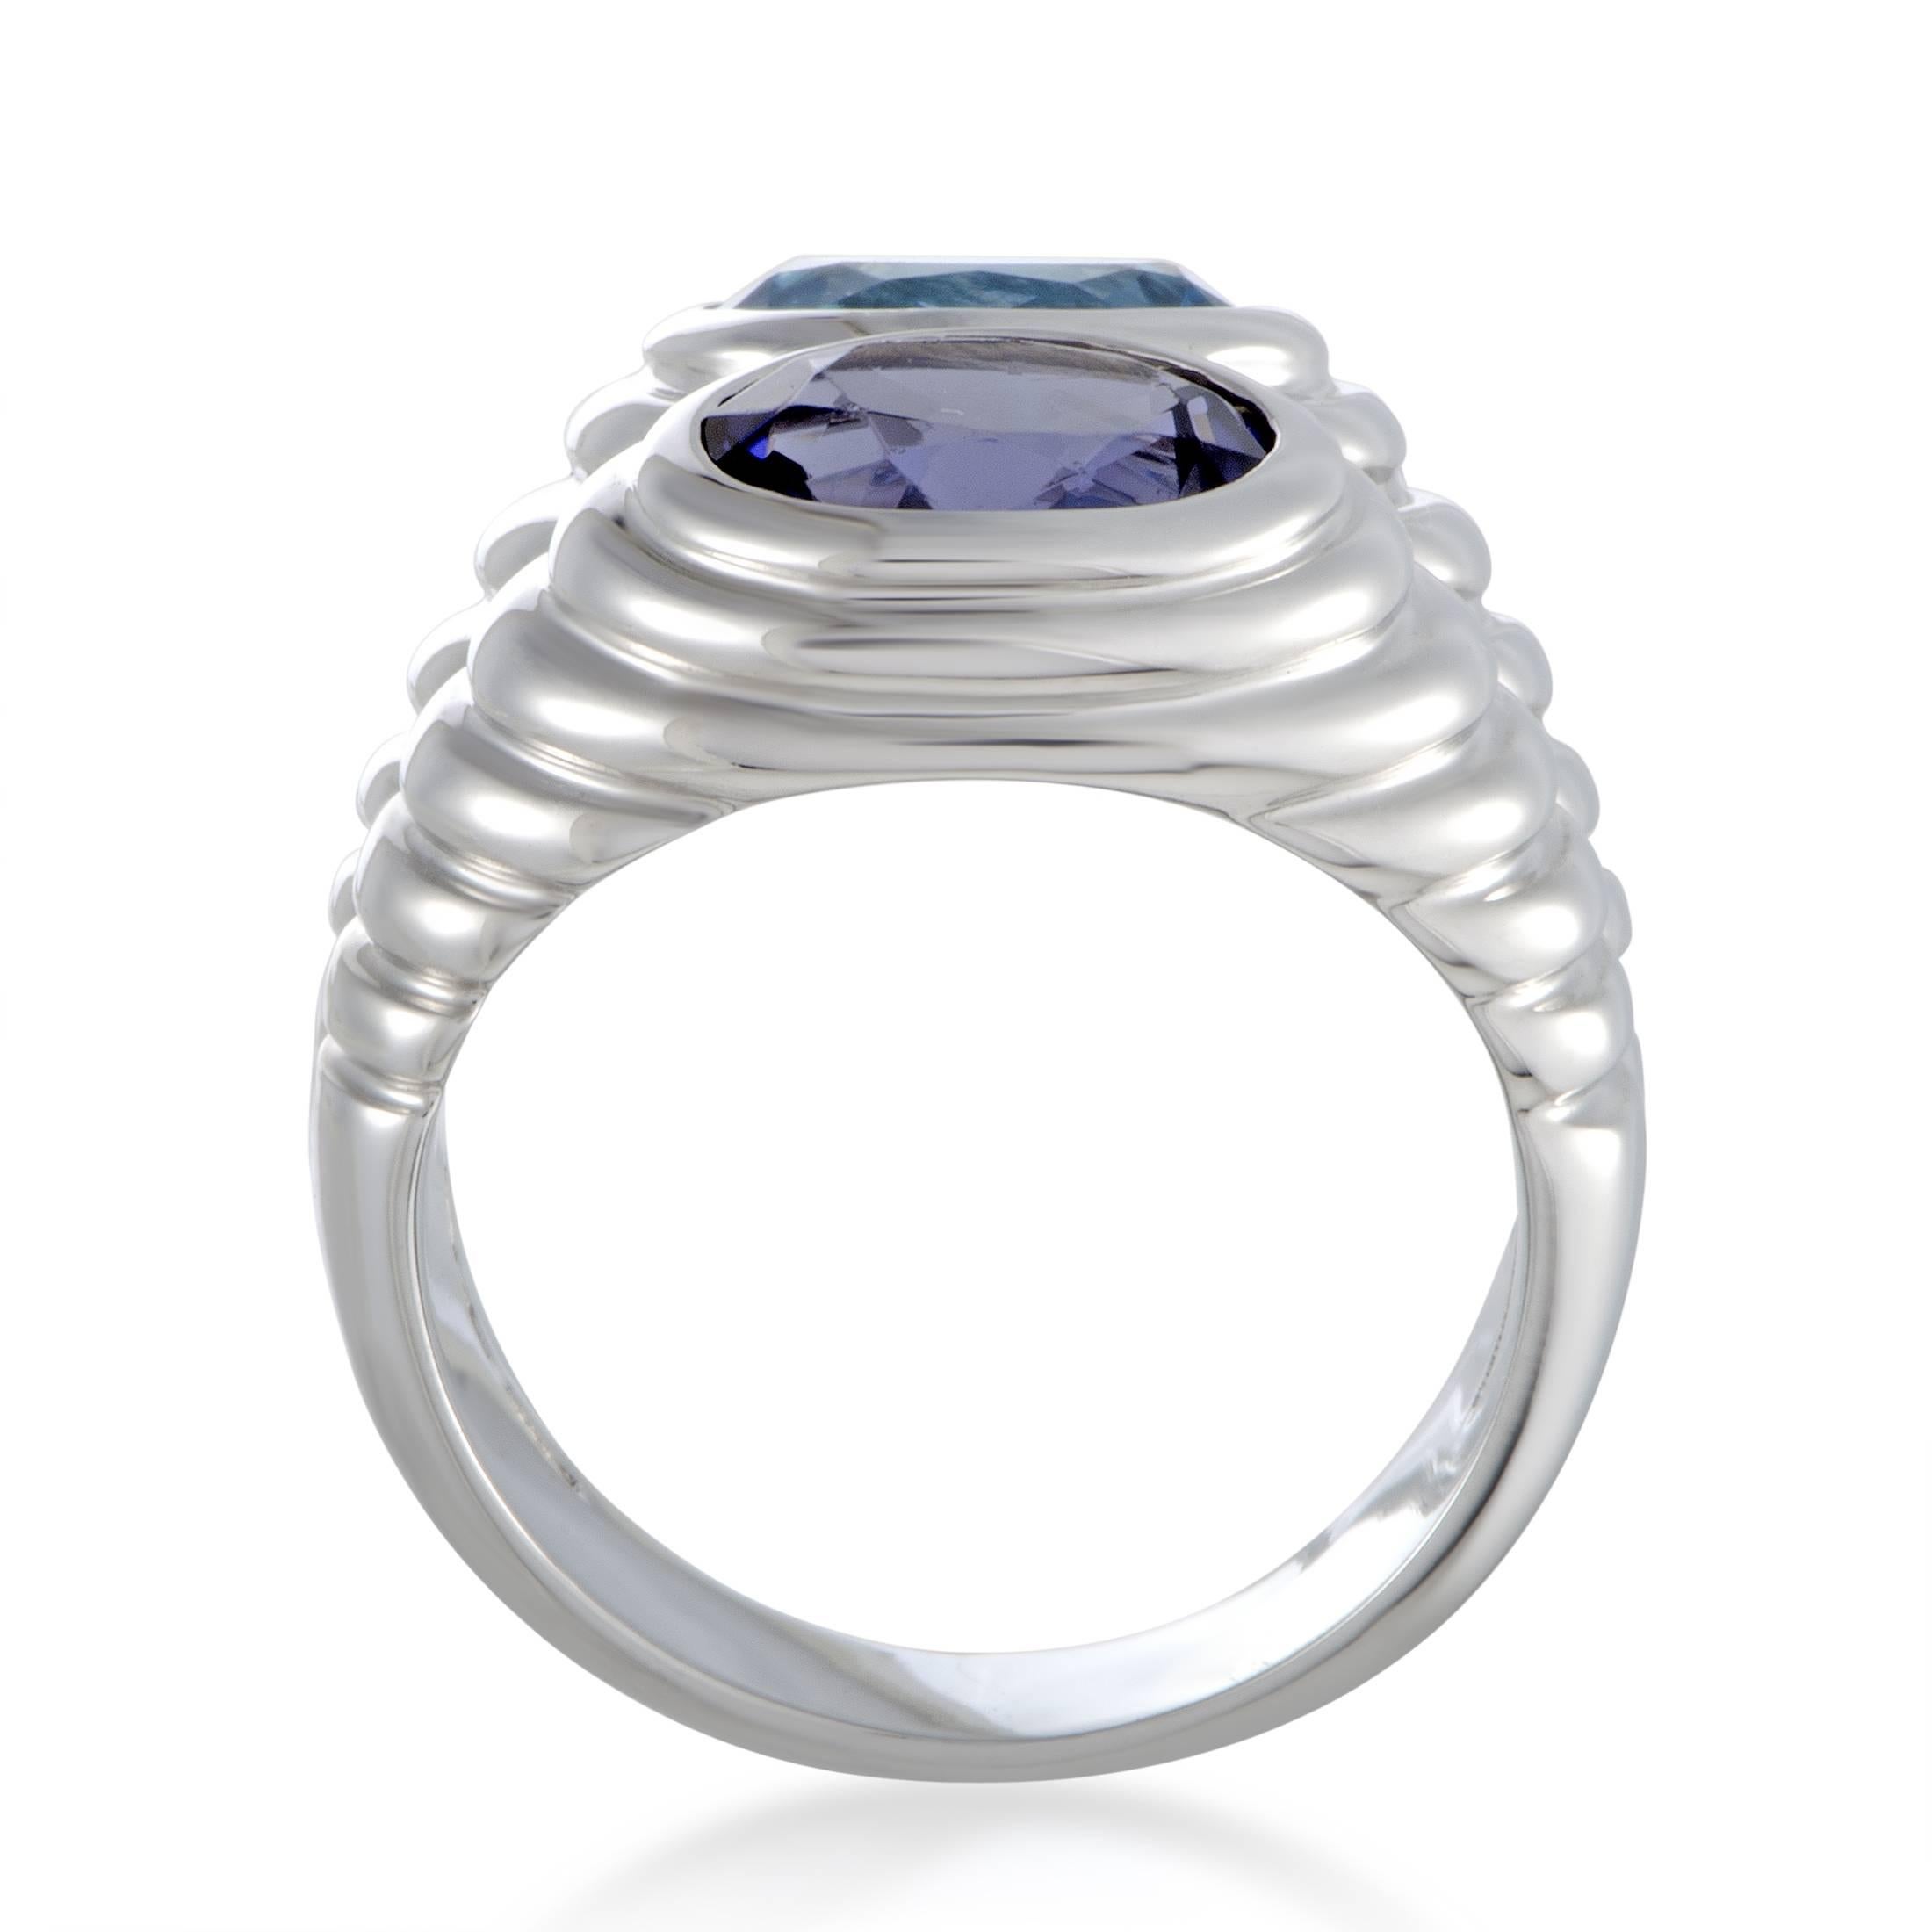 Presenting a perfect backdrop for the alluring gemstones, the 18K white gold gives a gorgeously elegant appeal to this fascinating piece from Bvlgari. The ring is set with a sublime topaz and an eye-catching iolite. Ring Top Dimensions: 15mm x 10mm